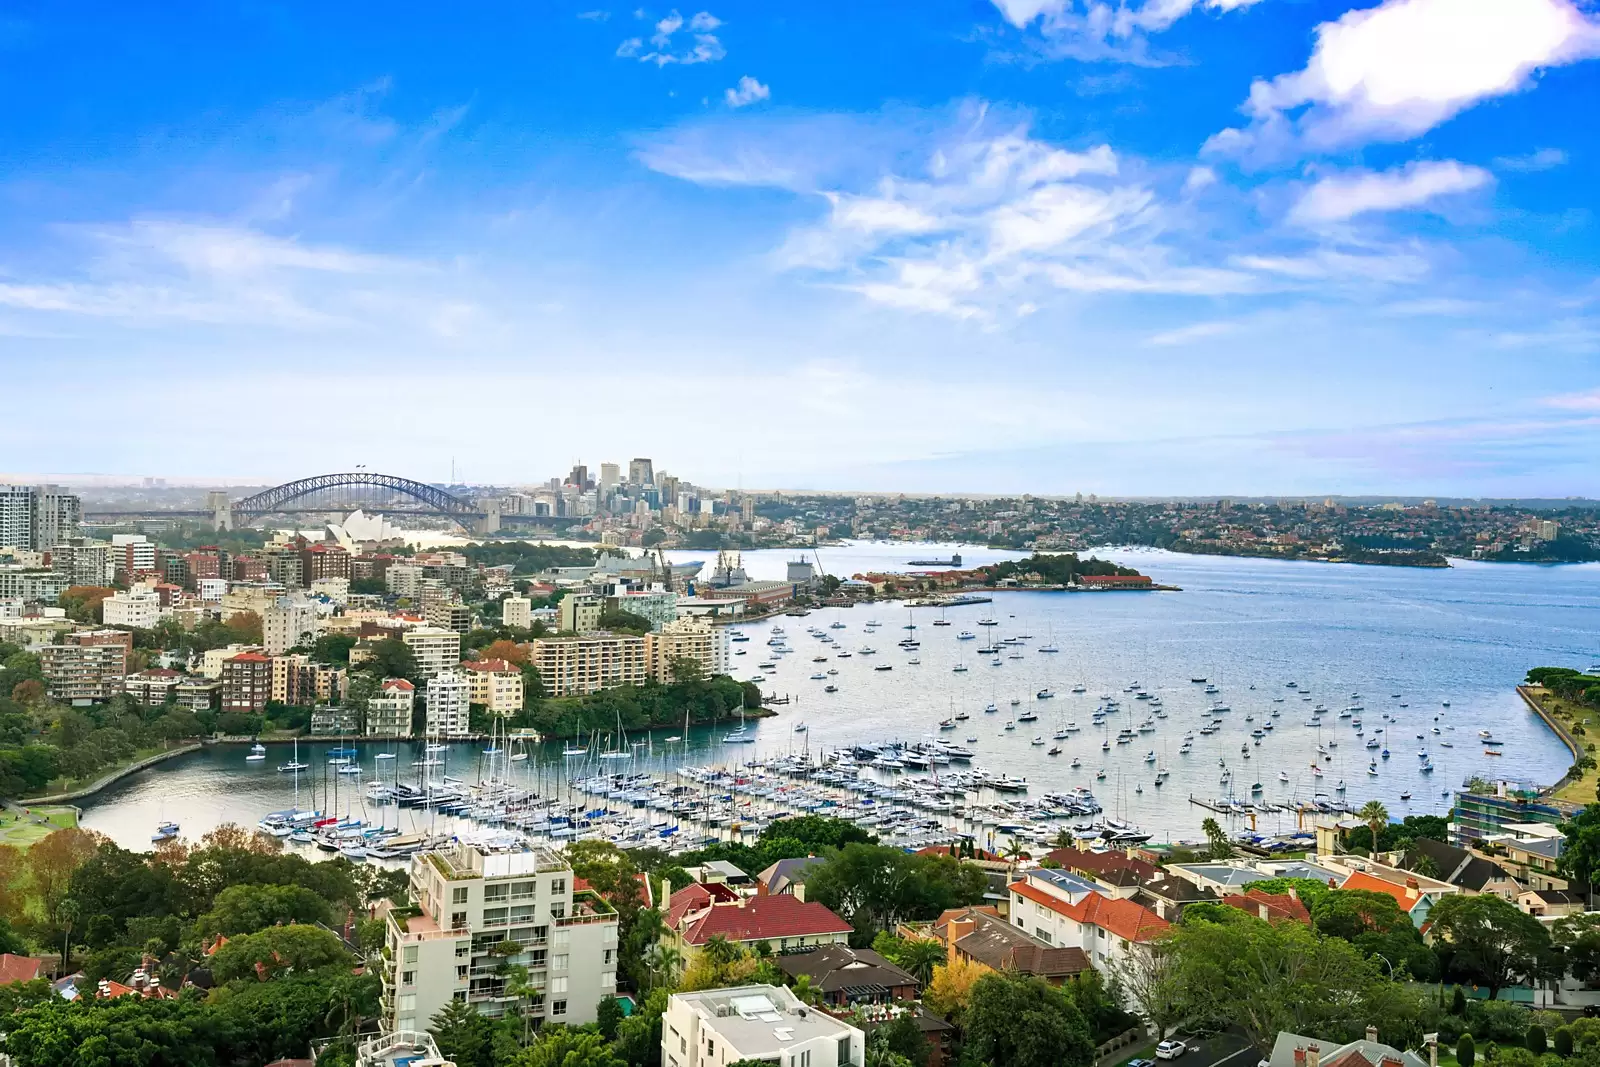 Photo #4: 25A Darling Point Road, Darling Point - Sold by Sydney Sotheby's International Realty